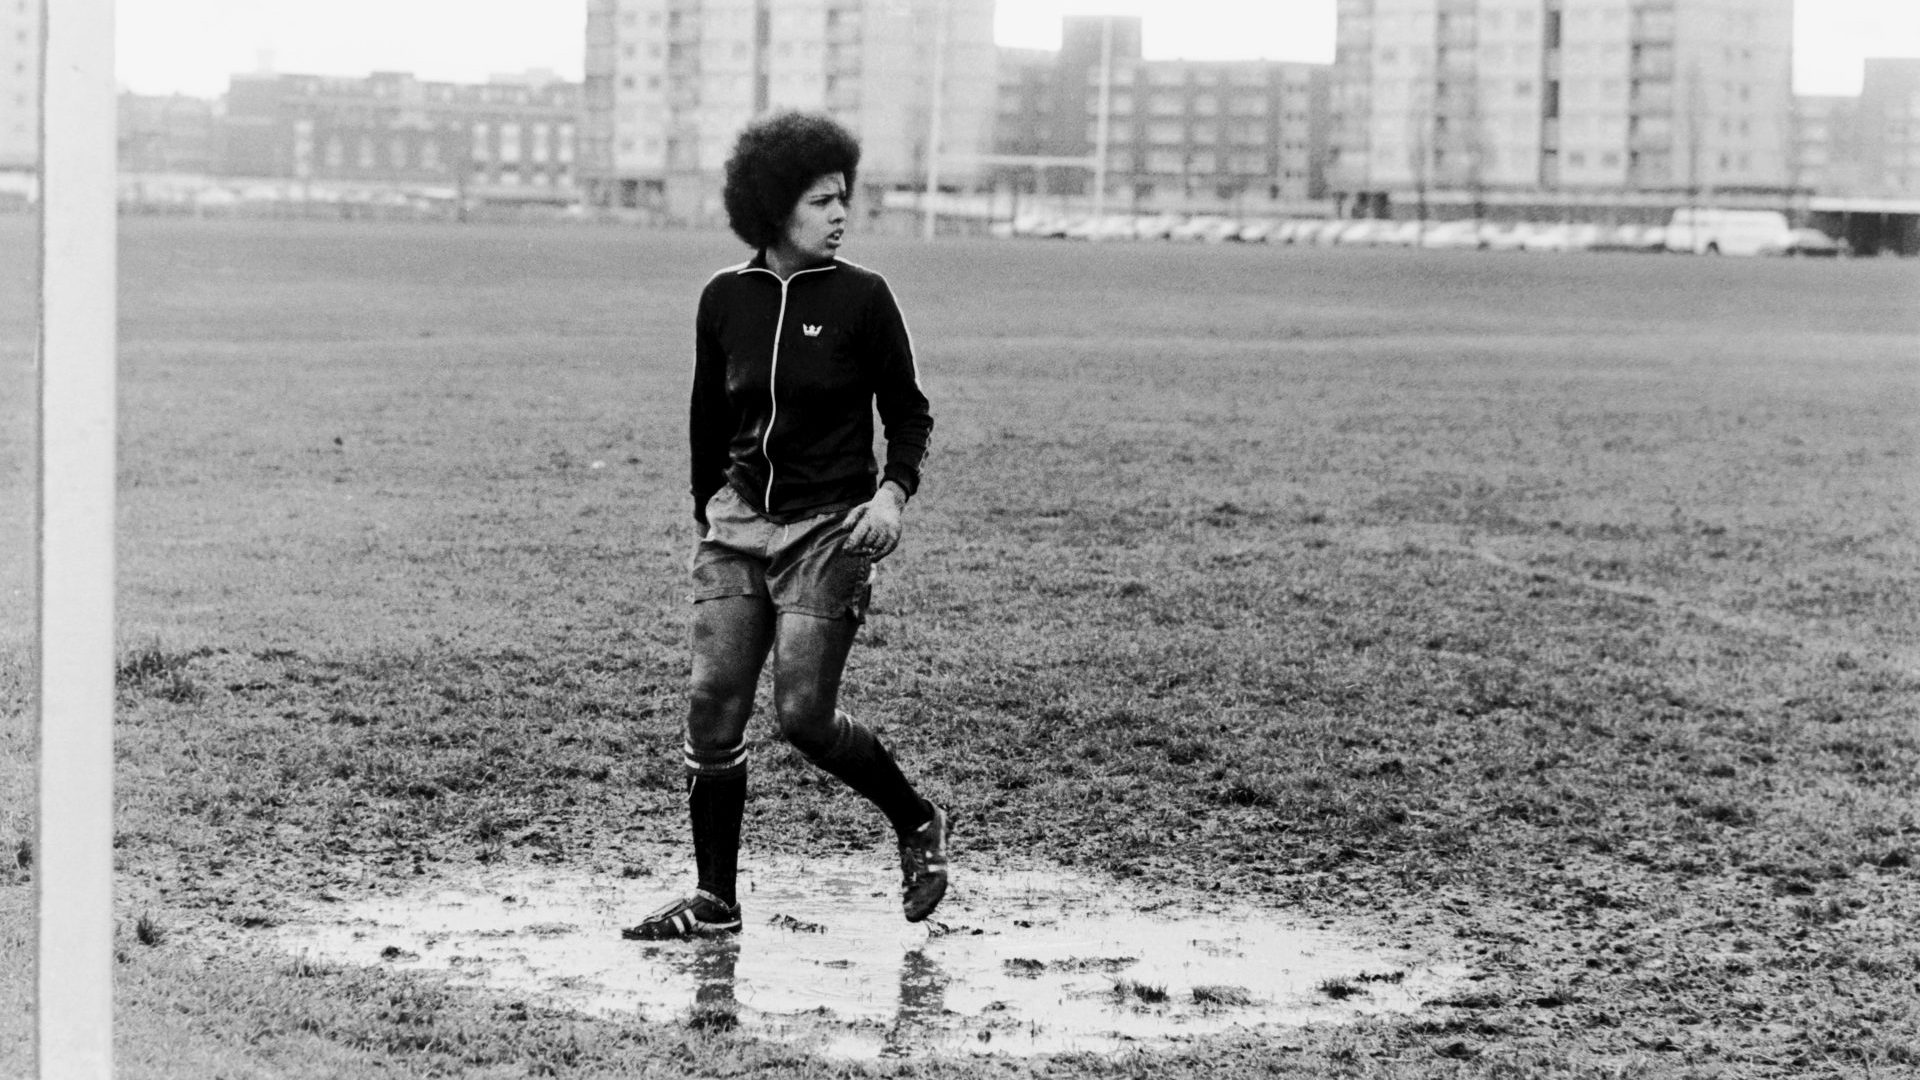 A pitch in Hackney, London, in the 1970s. Pitches for female players at that time were usually recreation fields with few facilities. All photos: Hy Money/TopFoto
